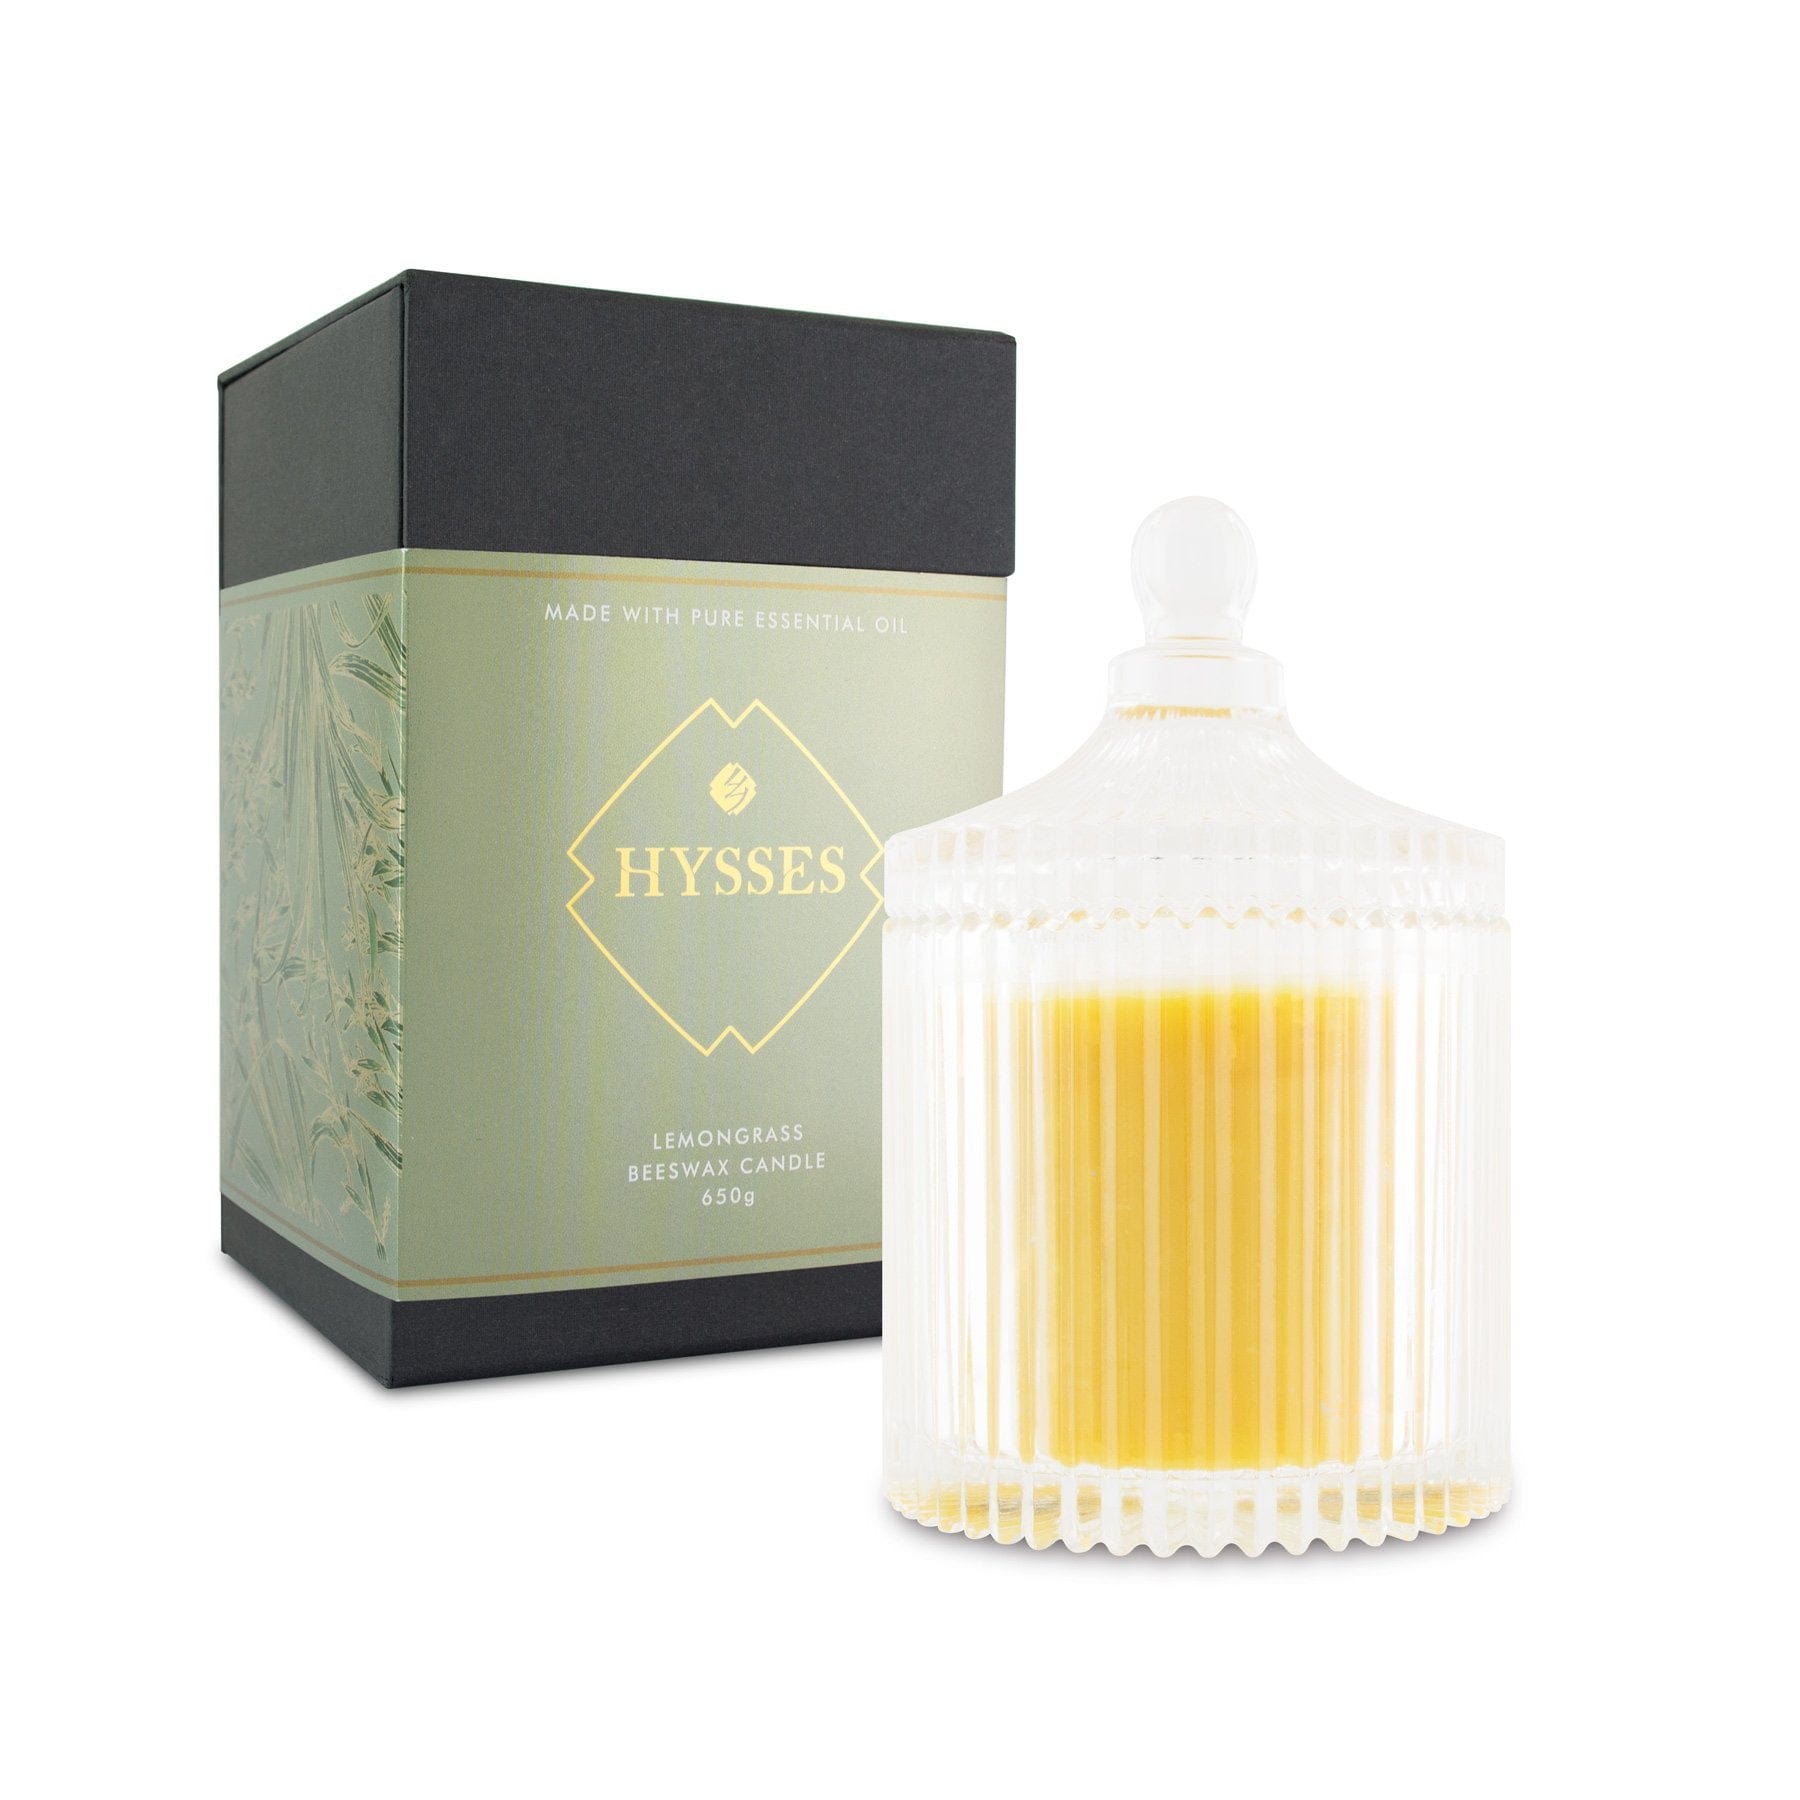 Hysses Home Scents 200g Beeswax Candle Lemongrass, 200g